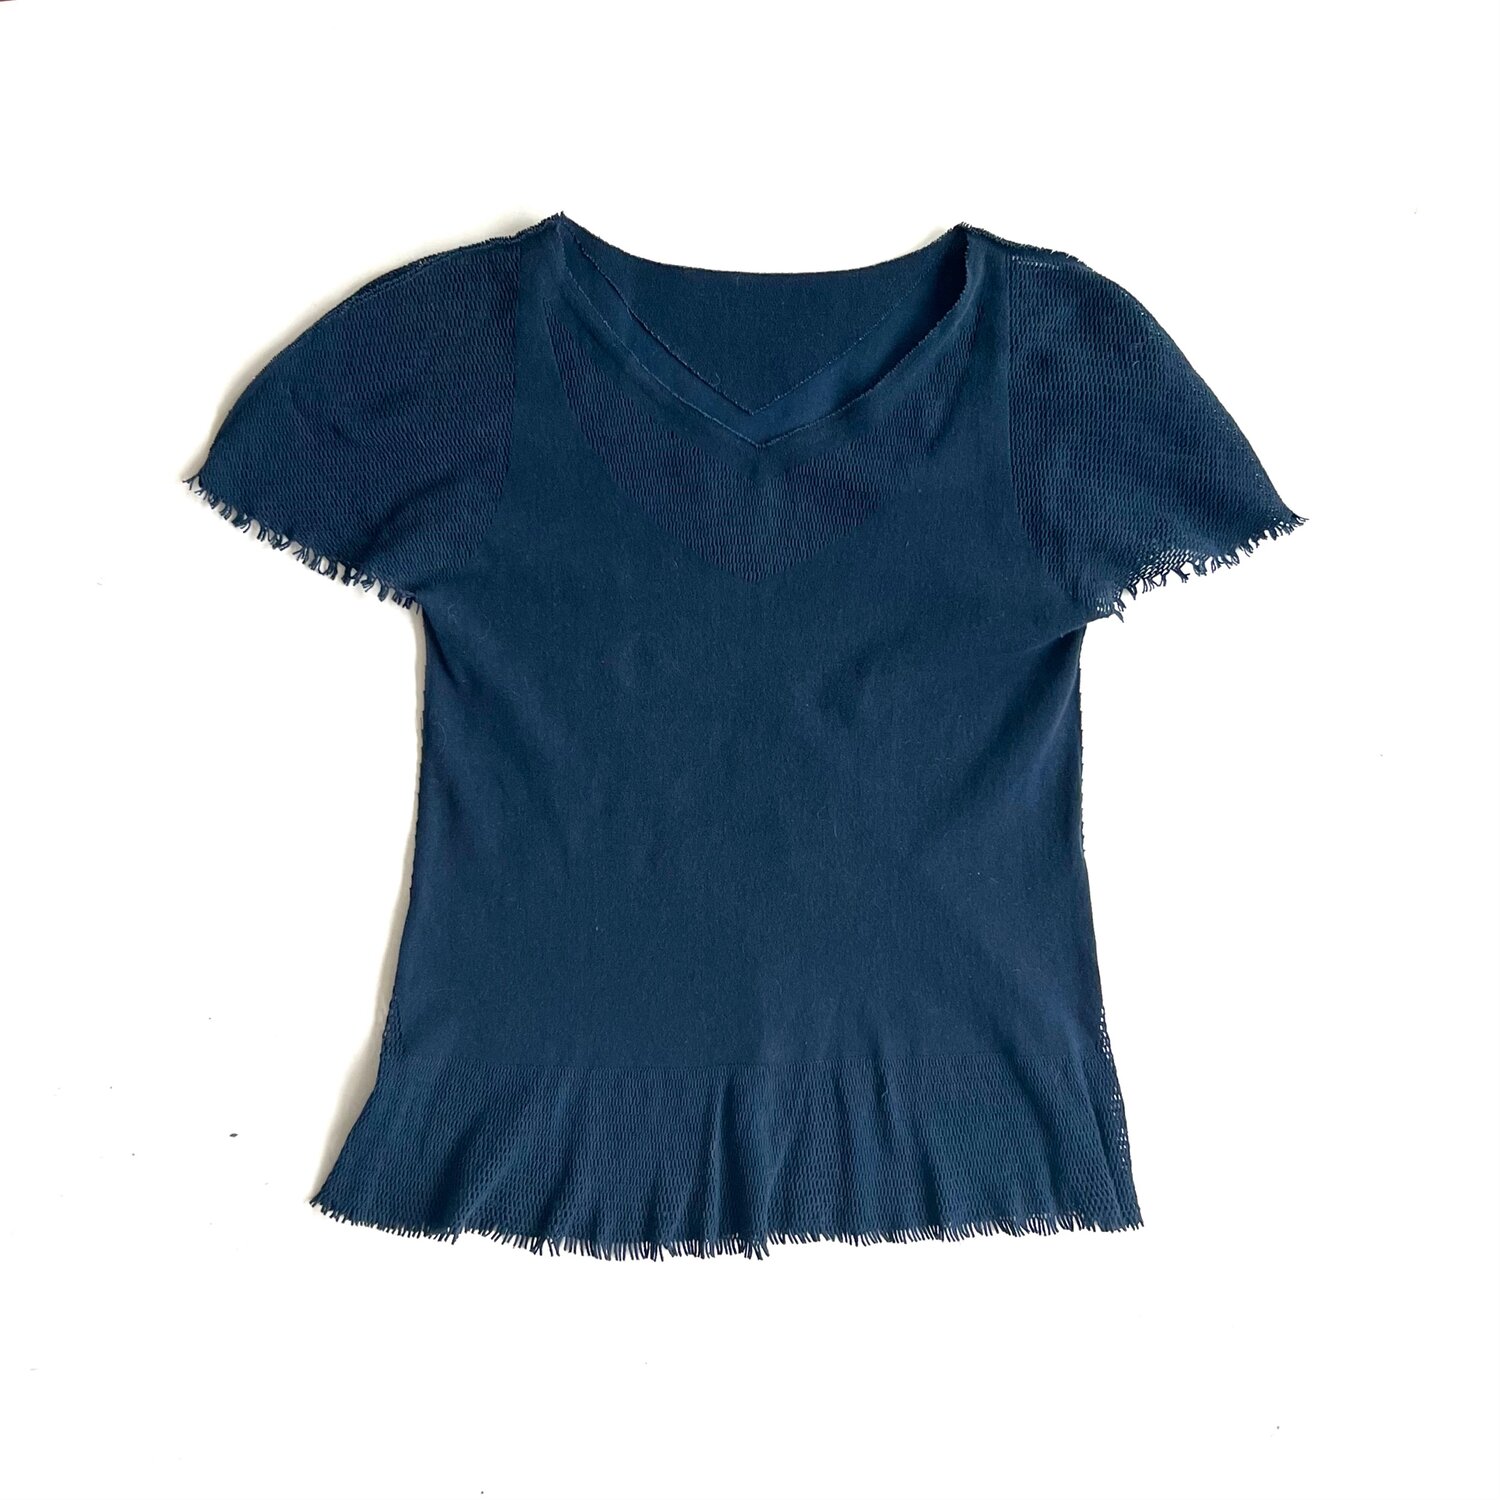 Issey Miyake fete top — consciously shop